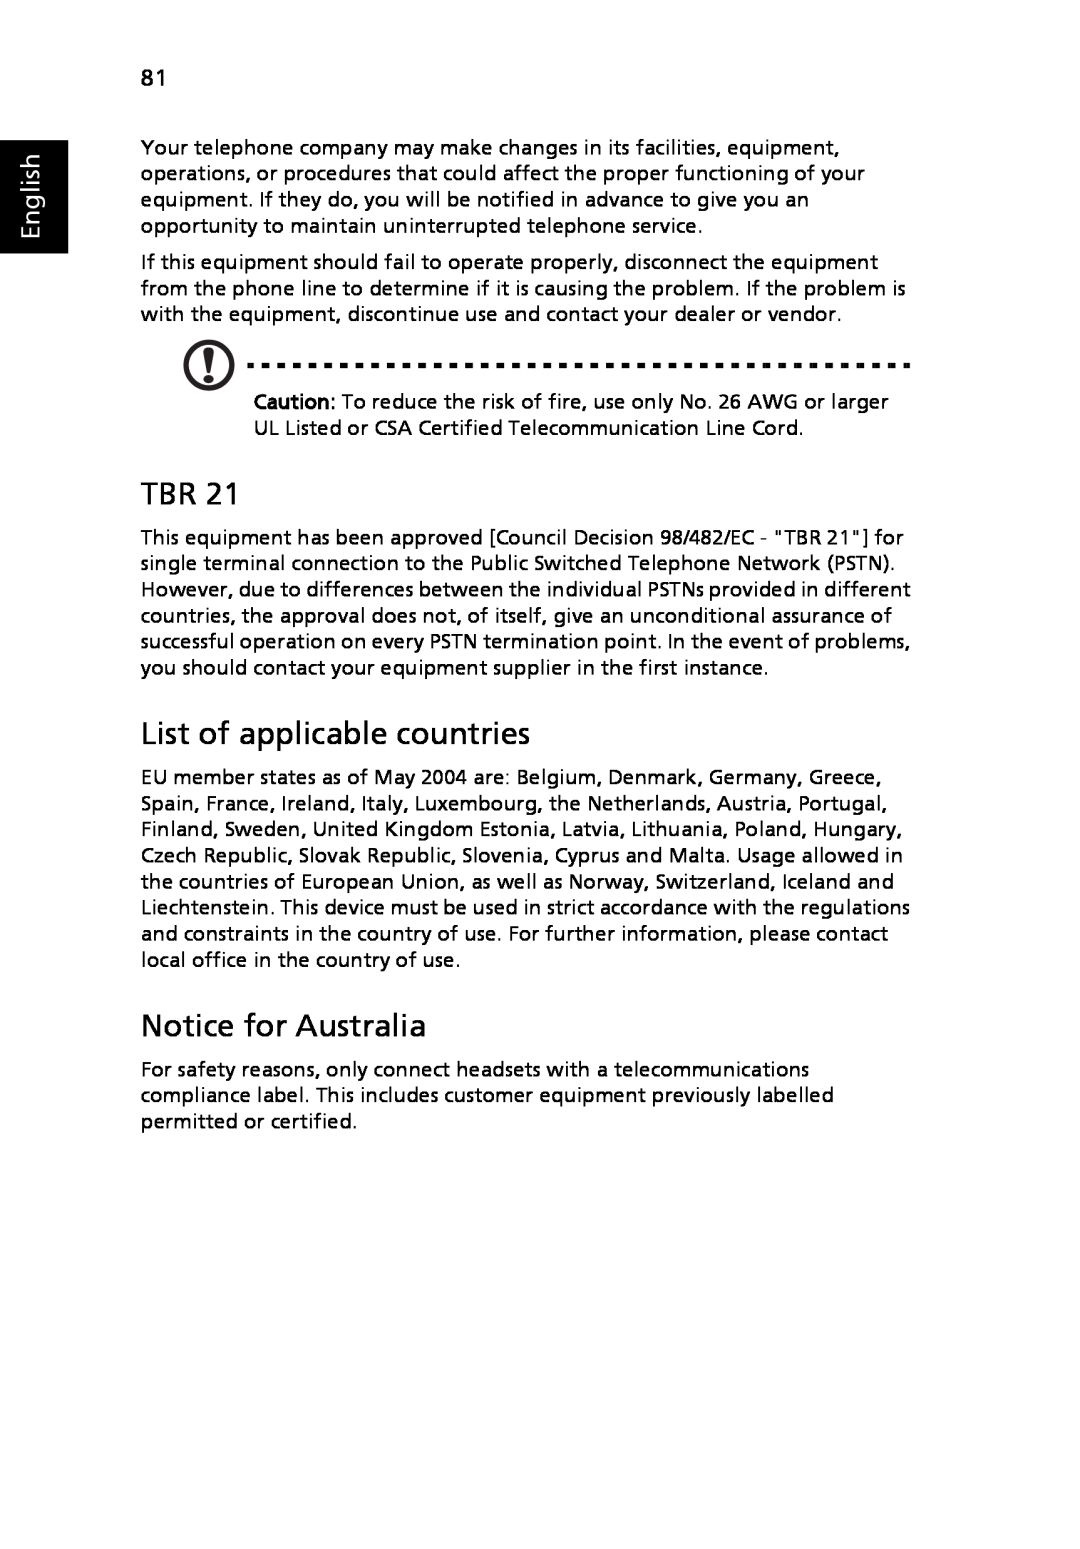 Acer 8920 Series, LE1 manual List of applicable countries, Notice for Australia, English 